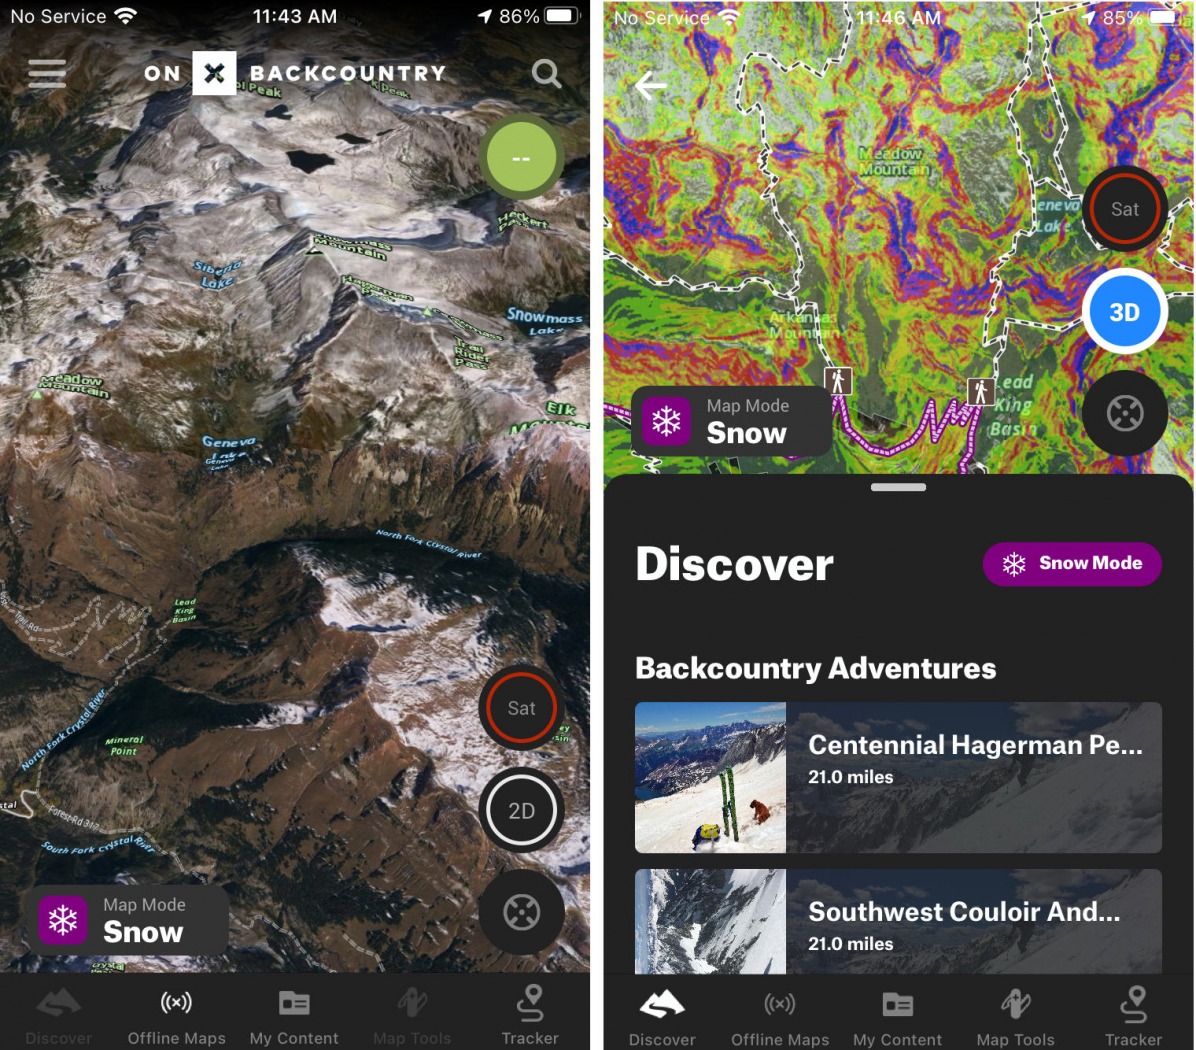 onX Backcountry offers a simple and user-friendly interface and unique features like 3D satellite imagery to aid with planning and integration with crowd-sourced backcountry route resources like Powder Project. 